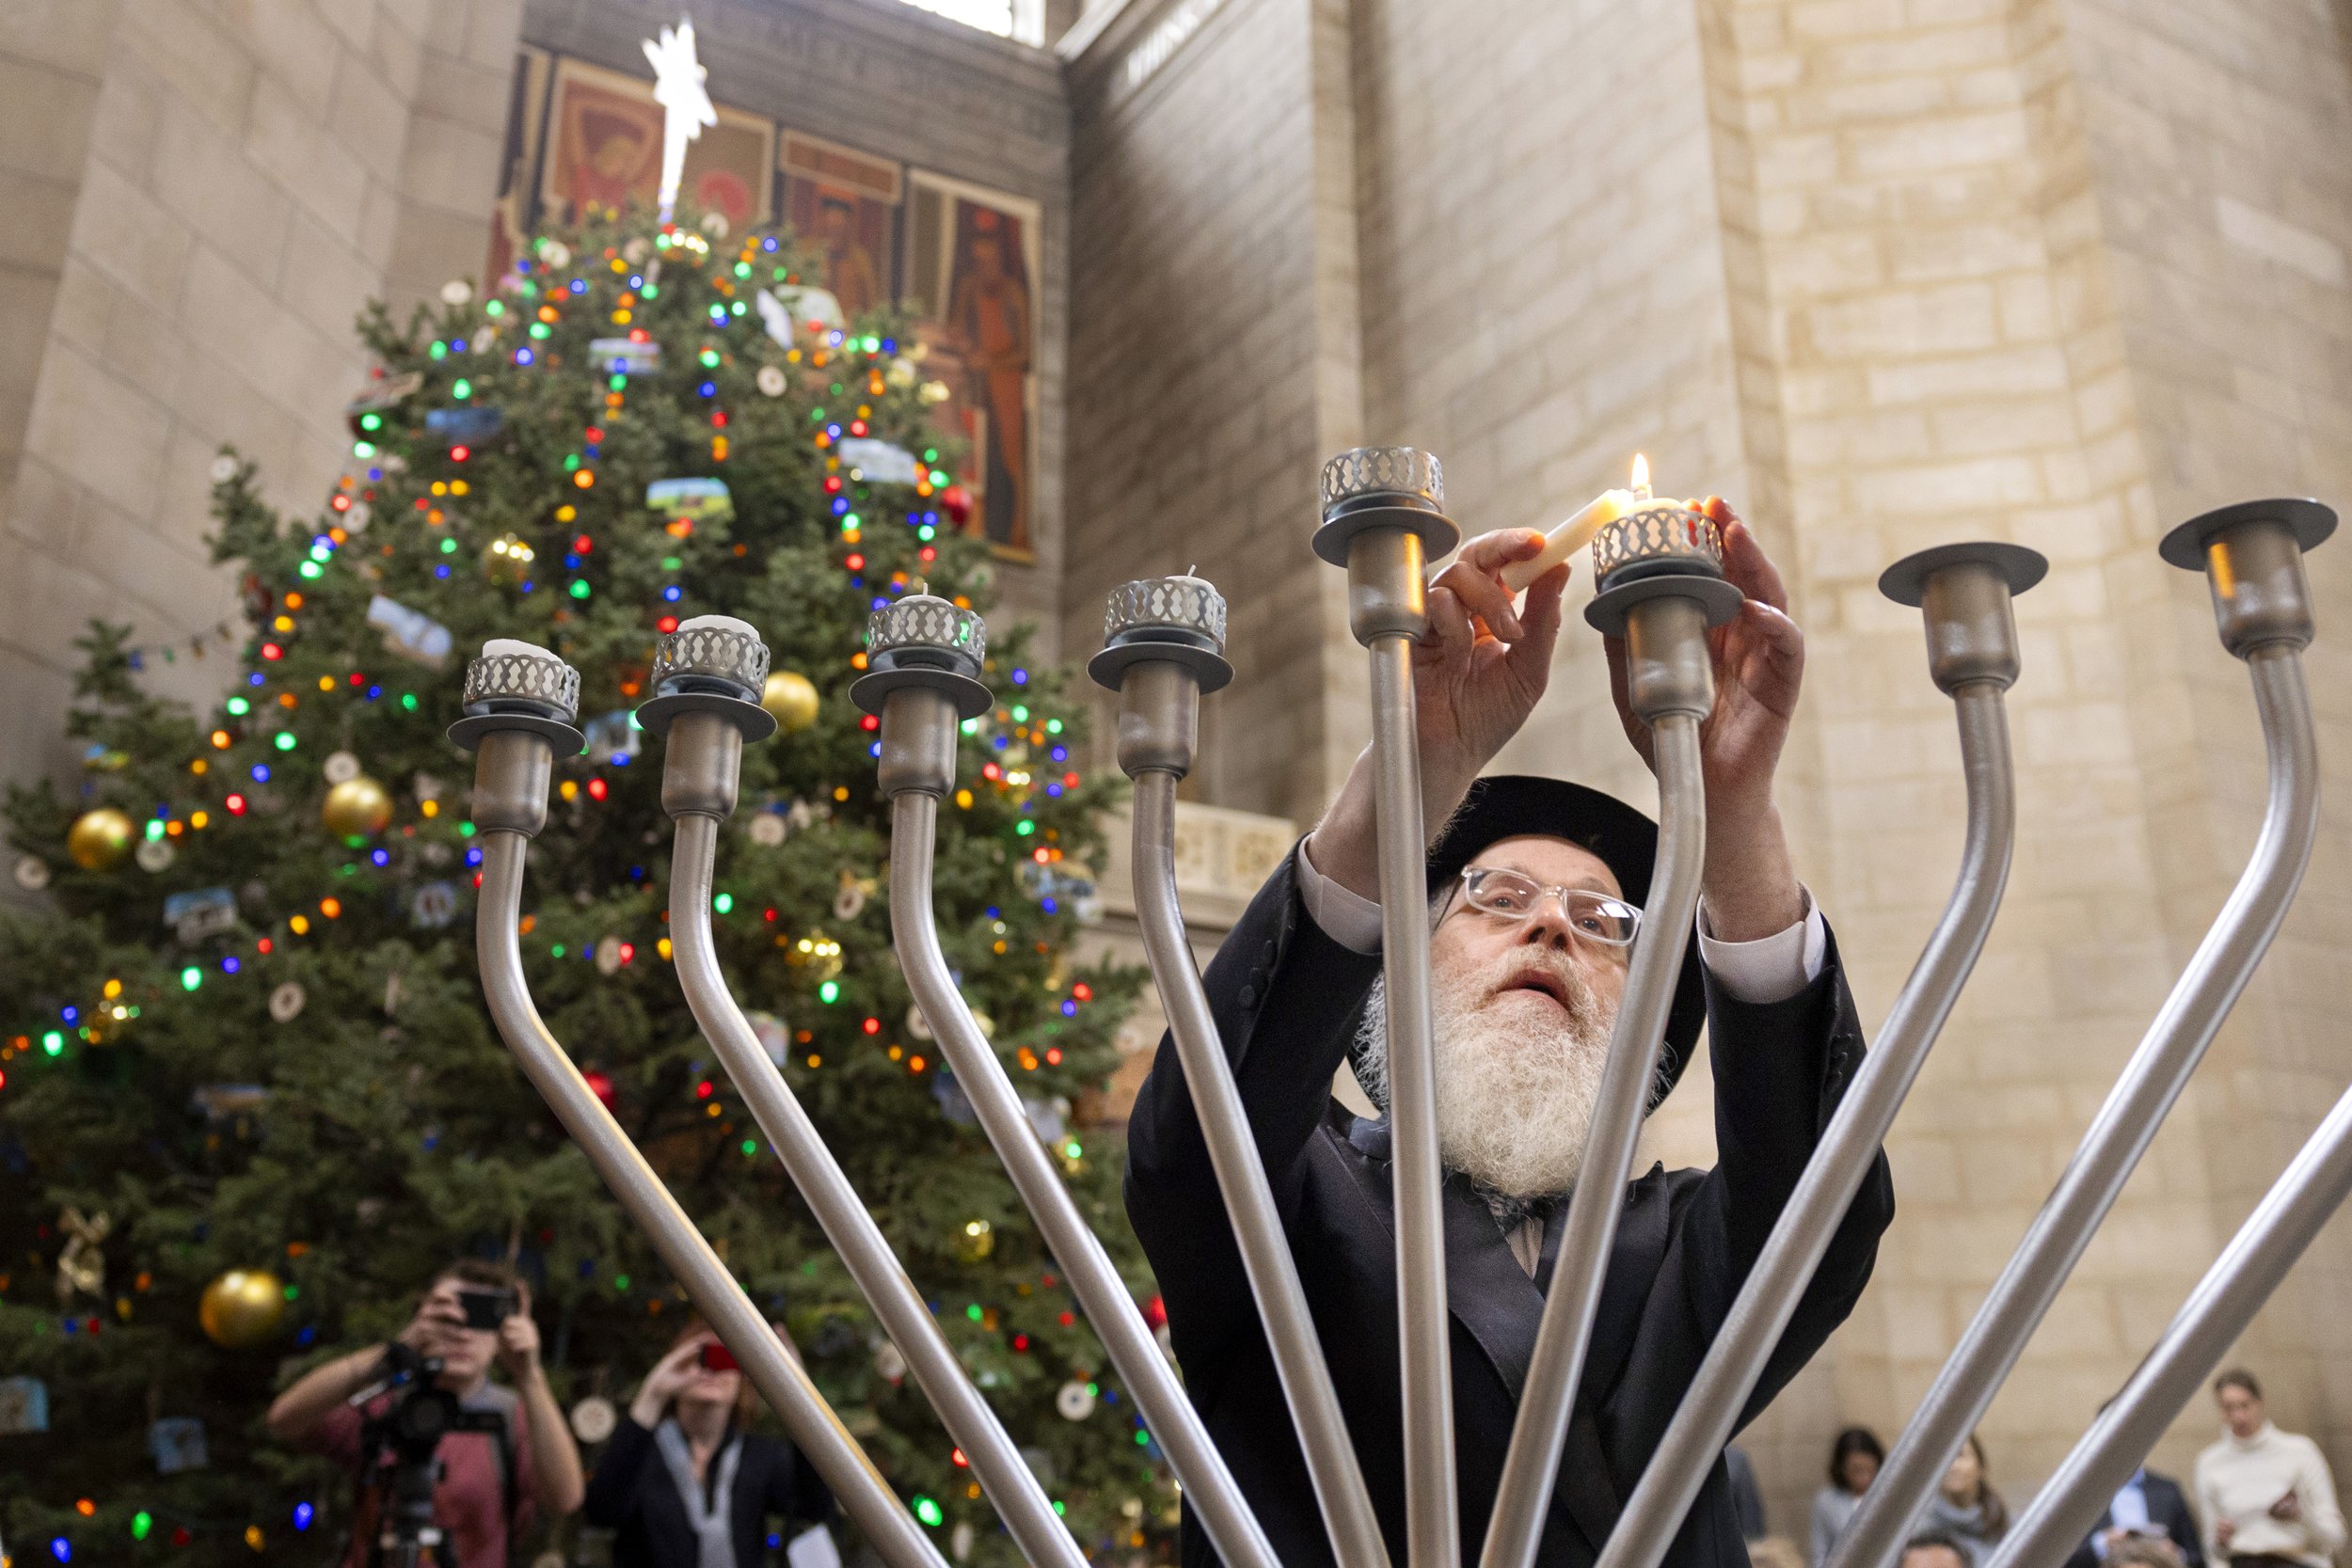  Rabbi Mendel Katzman, Executive Director at Chabad of Nebraska and a member of OPD Chaplains Corps, uses the shamash to light a second candle of the menorah during a ceremony held in the rotunda of the State Capitol on the fifth day of Hanukkah, on 